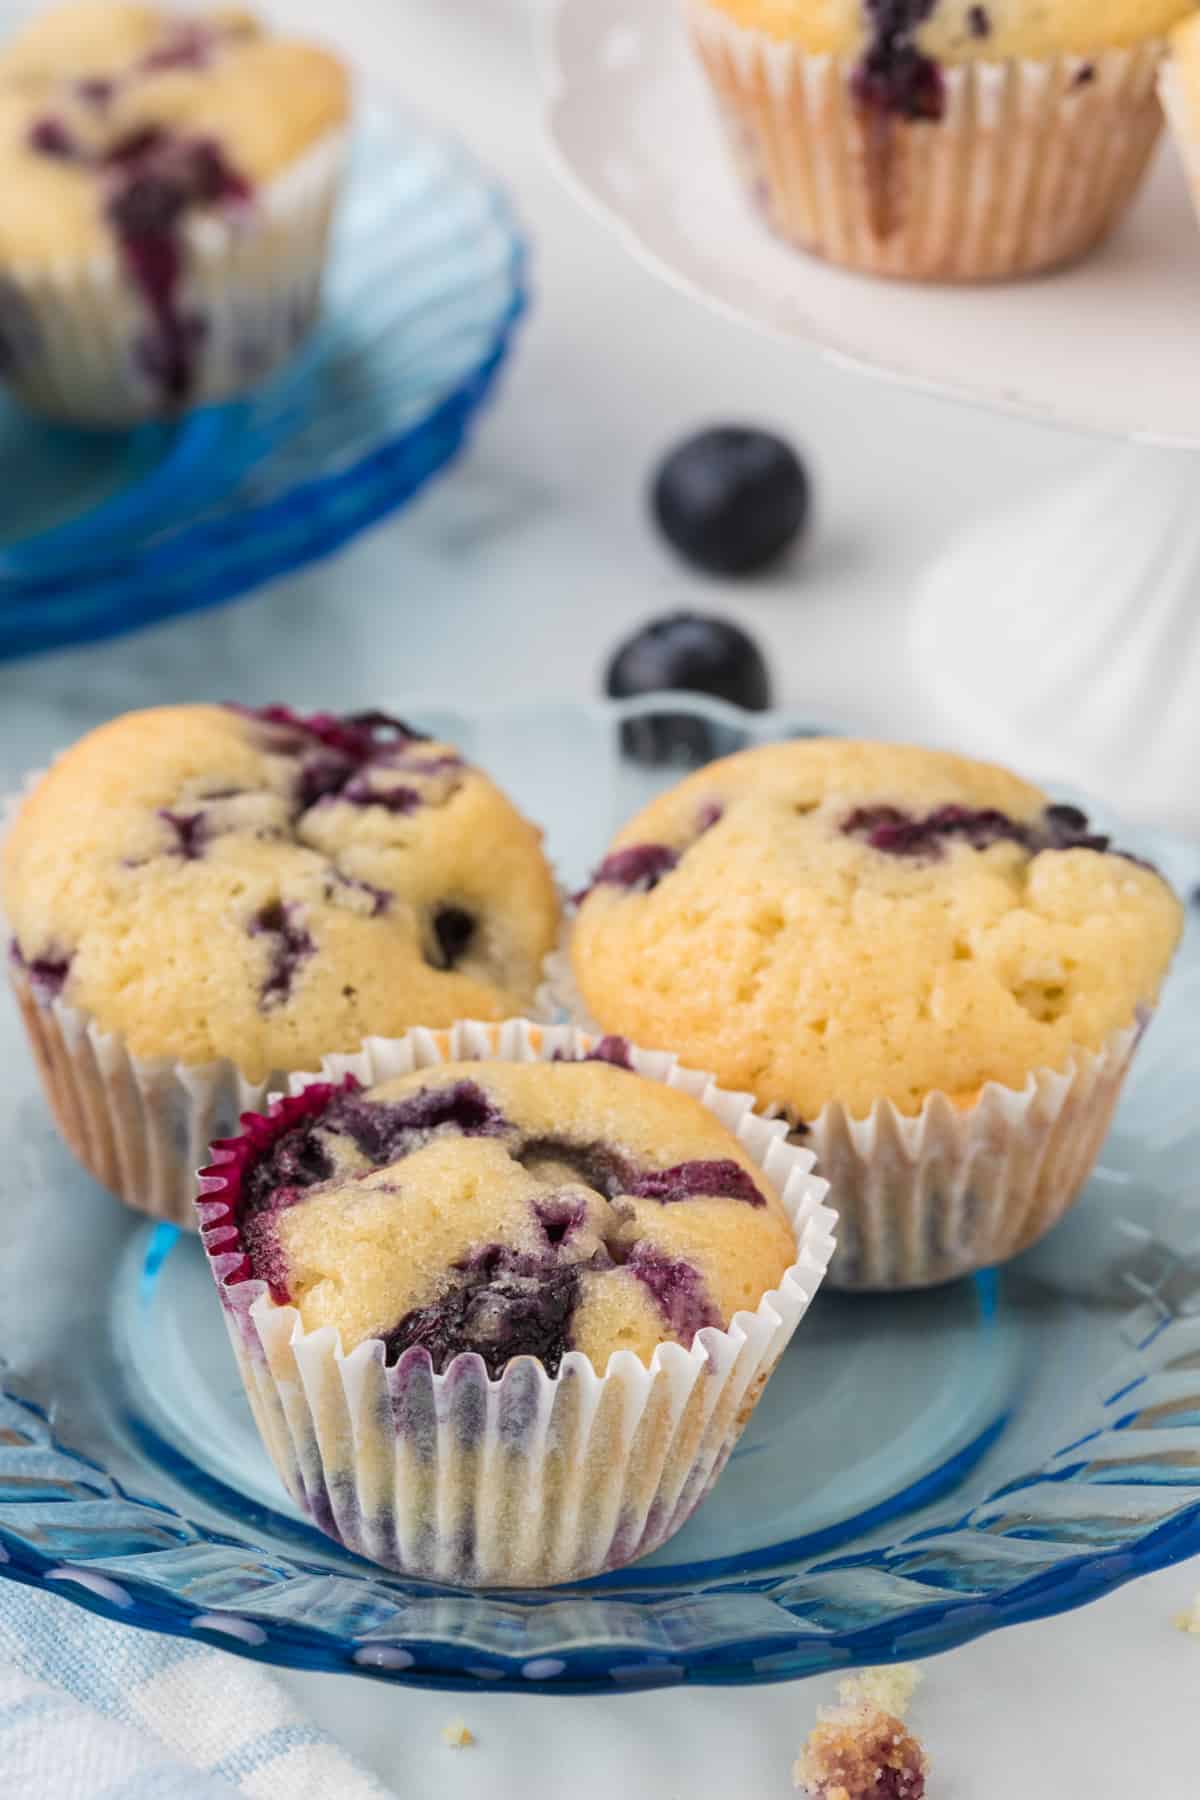 Blueberry muffins on a blue plate.